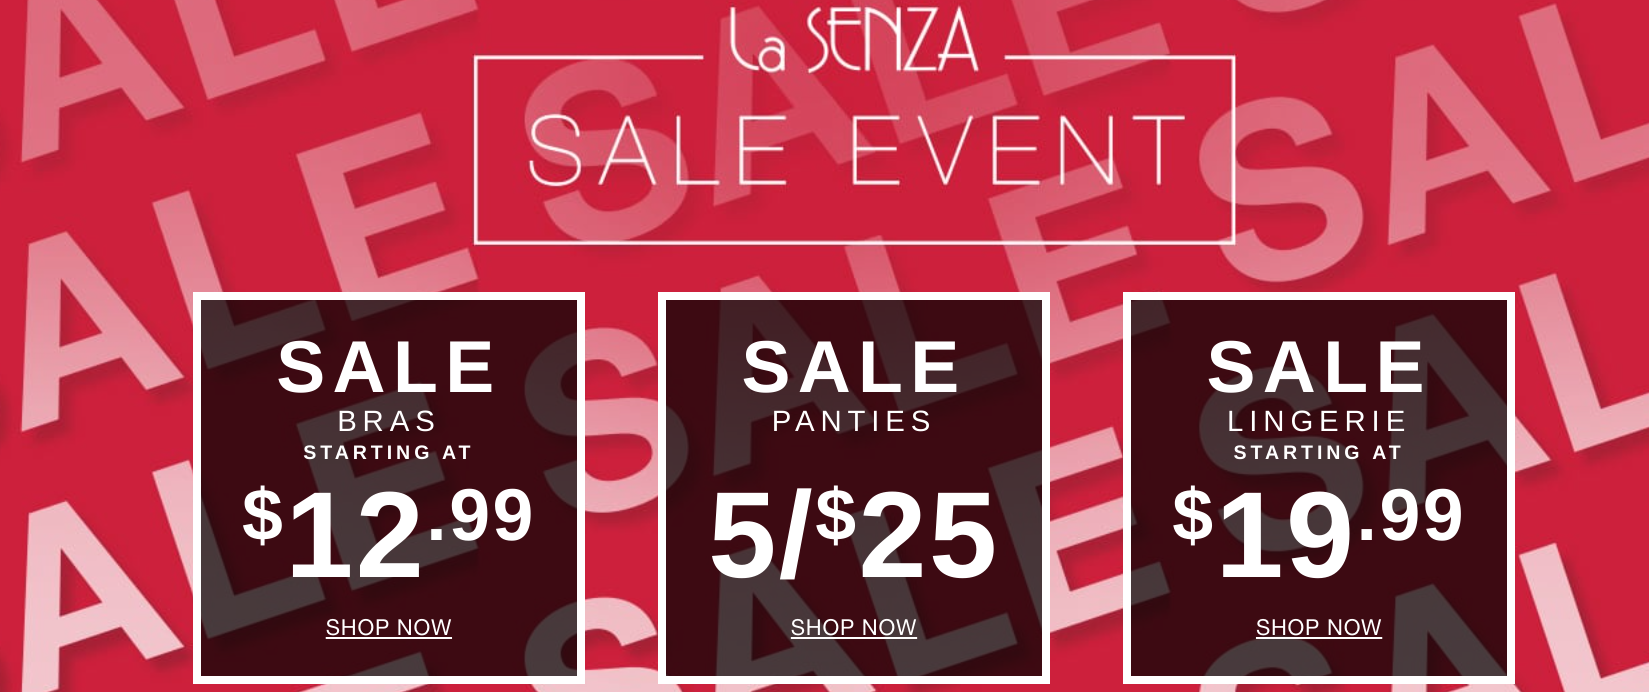 La Senza Canada: Sale Event + $10 Off Bra for Members + Clearance -  Canadian Freebies, Coupons, Deals, Bargains, Flyers, Contests Canada  Canadian Freebies, Coupons, Deals, Bargains, Flyers, Contests Canada